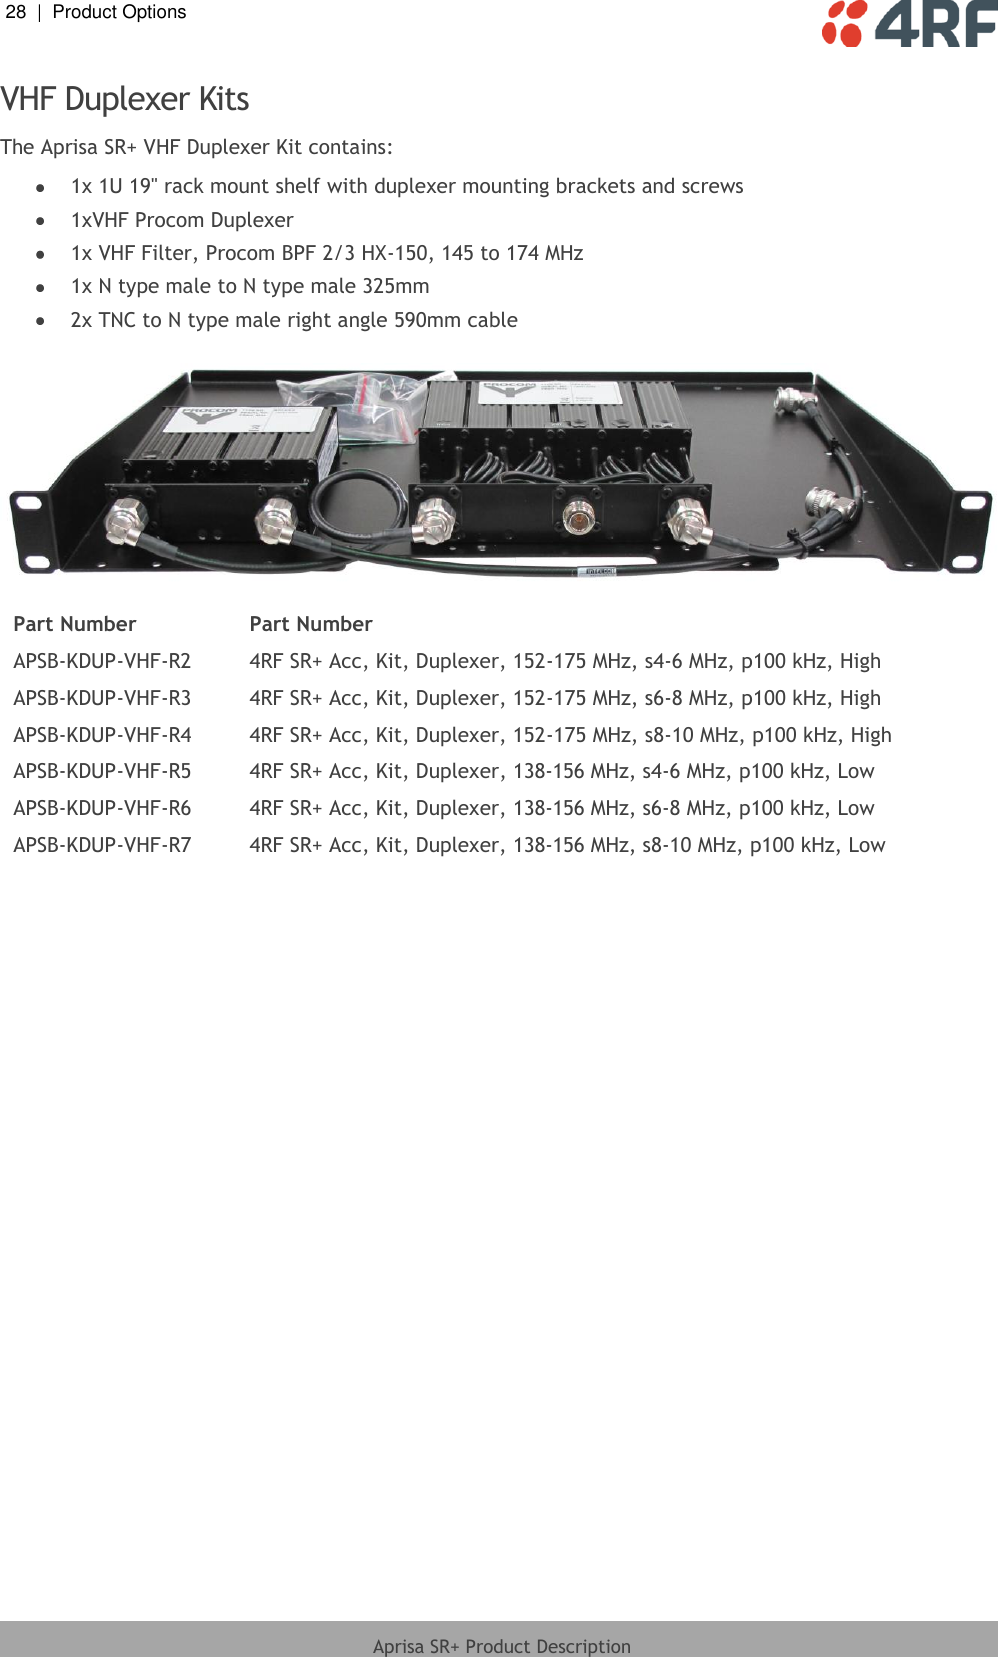 28  |  Product Options   Aprisa SR+ Product Description  VHF Duplexer Kits The Aprisa SR+ VHF Duplexer Kit contains:  1x 1U 19&quot; rack mount shelf with duplexer mounting brackets and screws  1xVHF Procom Duplexer  1x VHF Filter, Procom BPF 2/3 HX-150, 145 to 174 MHz  1x N type male to N type male 325mm  2x TNC to N type male right angle 590mm cable    Part Number Part Number APSB-KDUP-VHF-R2 4RF SR+ Acc, Kit, Duplexer, 152-175 MHz, s4-6 MHz, p100 kHz, High APSB-KDUP-VHF-R3 4RF SR+ Acc, Kit, Duplexer, 152-175 MHz, s6-8 MHz, p100 kHz, High APSB-KDUP-VHF-R4 4RF SR+ Acc, Kit, Duplexer, 152-175 MHz, s8-10 MHz, p100 kHz, High APSB-KDUP-VHF-R5 4RF SR+ Acc, Kit, Duplexer, 138-156 MHz, s4-6 MHz, p100 kHz, Low APSB-KDUP-VHF-R6 4RF SR+ Acc, Kit, Duplexer, 138-156 MHz, s6-8 MHz, p100 kHz, Low APSB-KDUP-VHF-R7 4RF SR+ Acc, Kit, Duplexer, 138-156 MHz, s8-10 MHz, p100 kHz, Low  